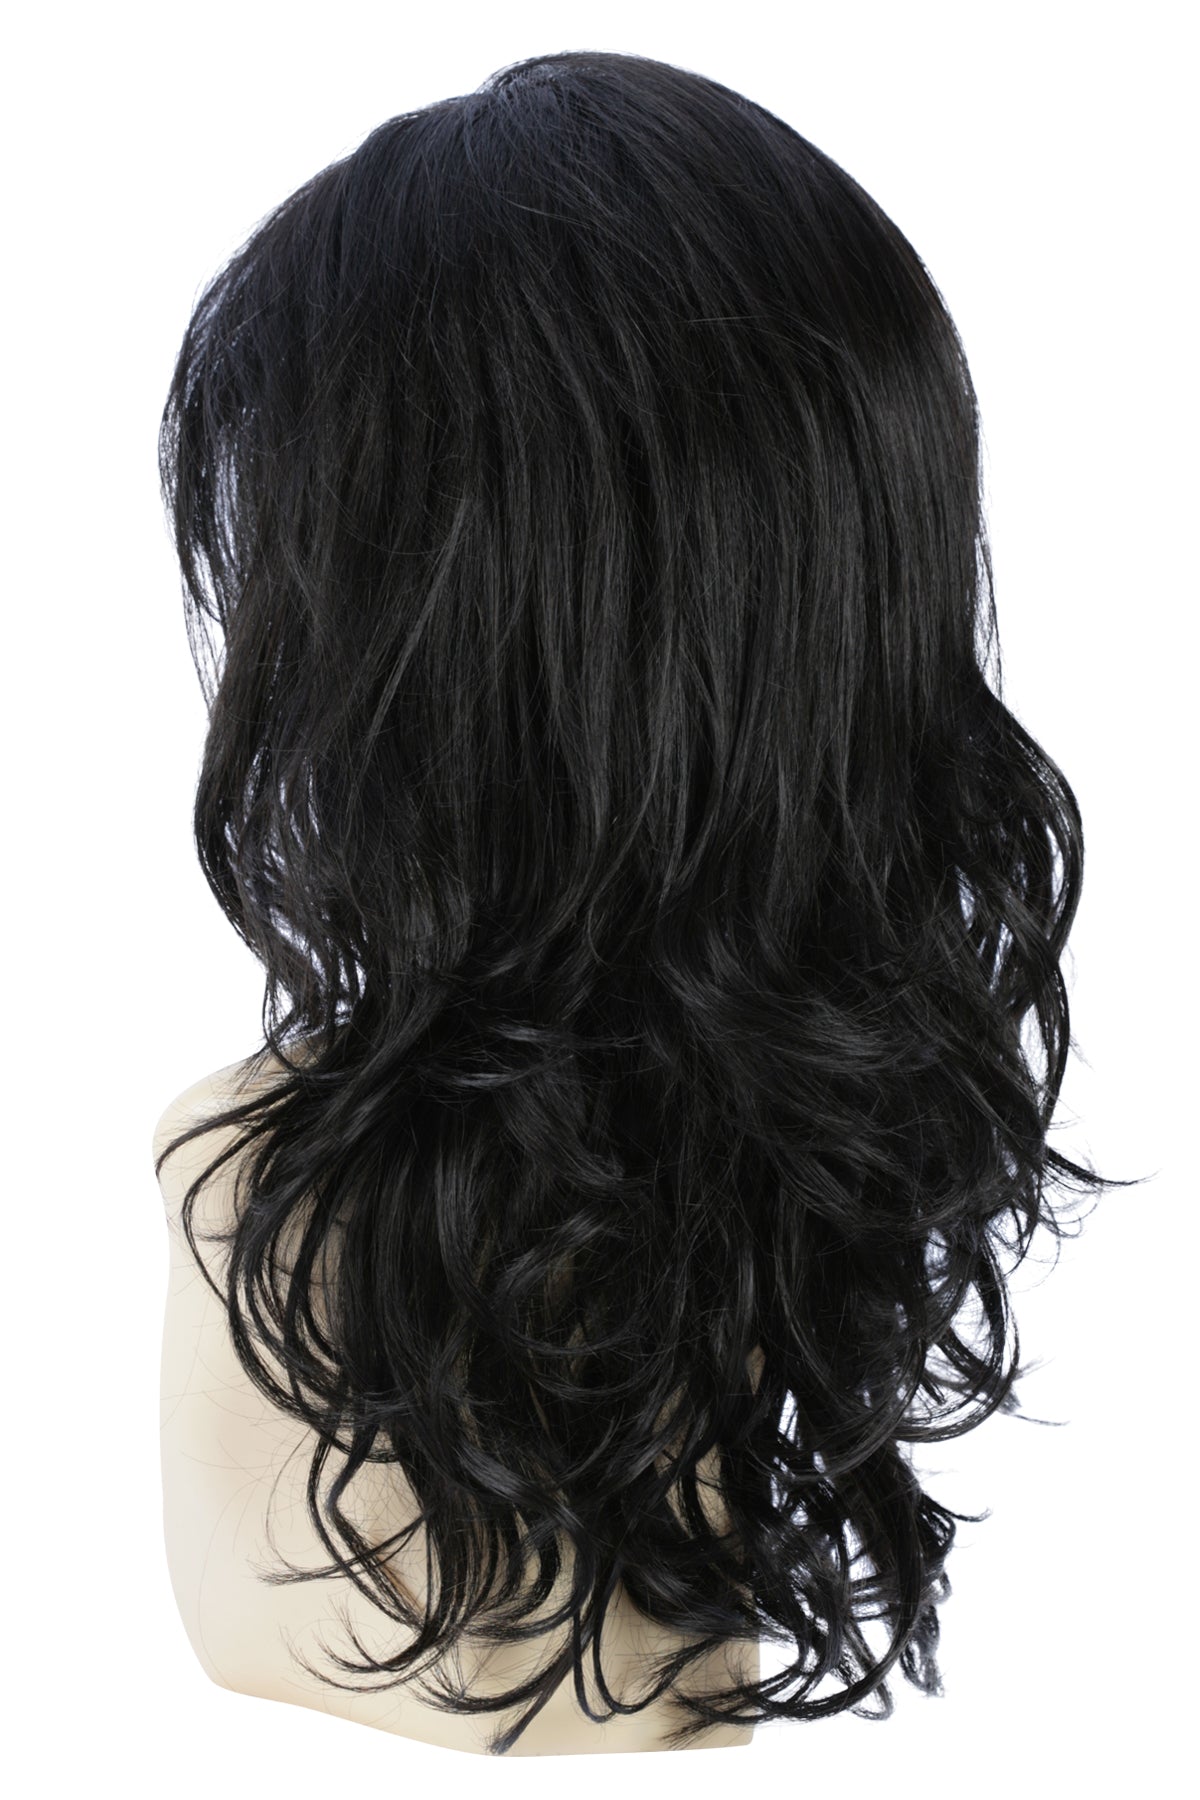 Pony Wrap 18" by Estetica Hair Piece Collection